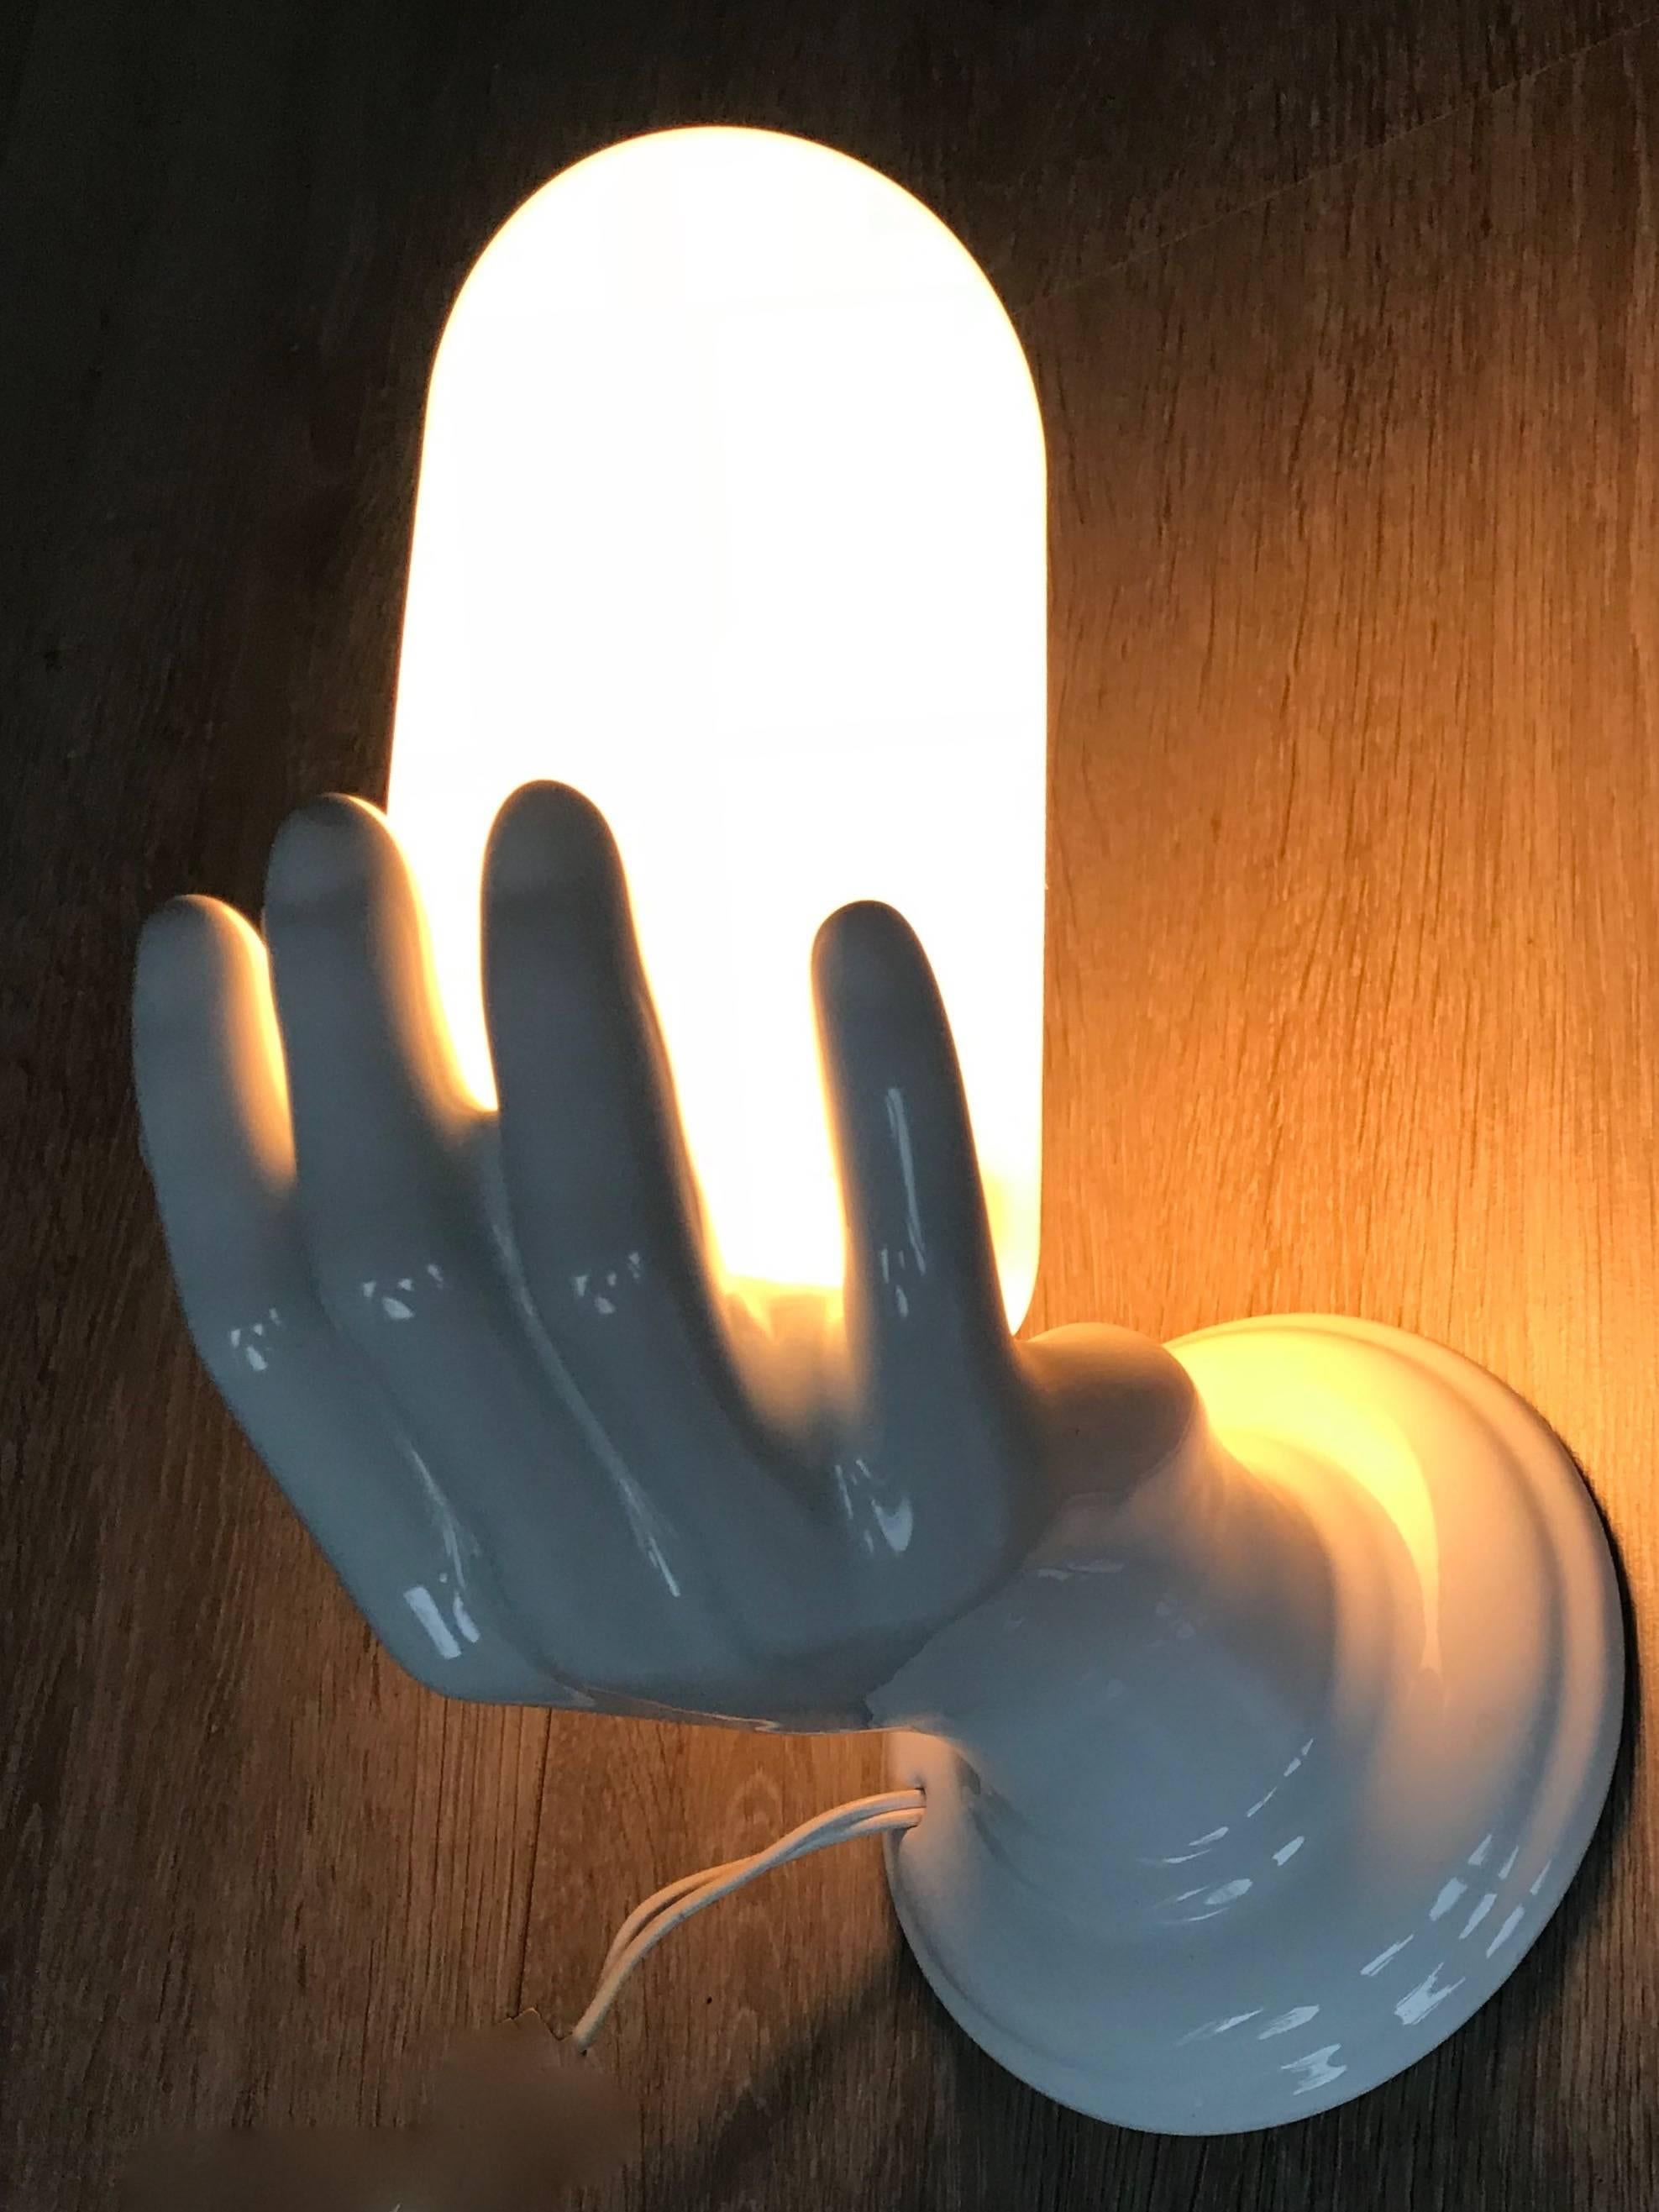 20th Century 1970s Glazed White Ceramic Right Hand Holding a Glass Wall Sconce or Wall Light